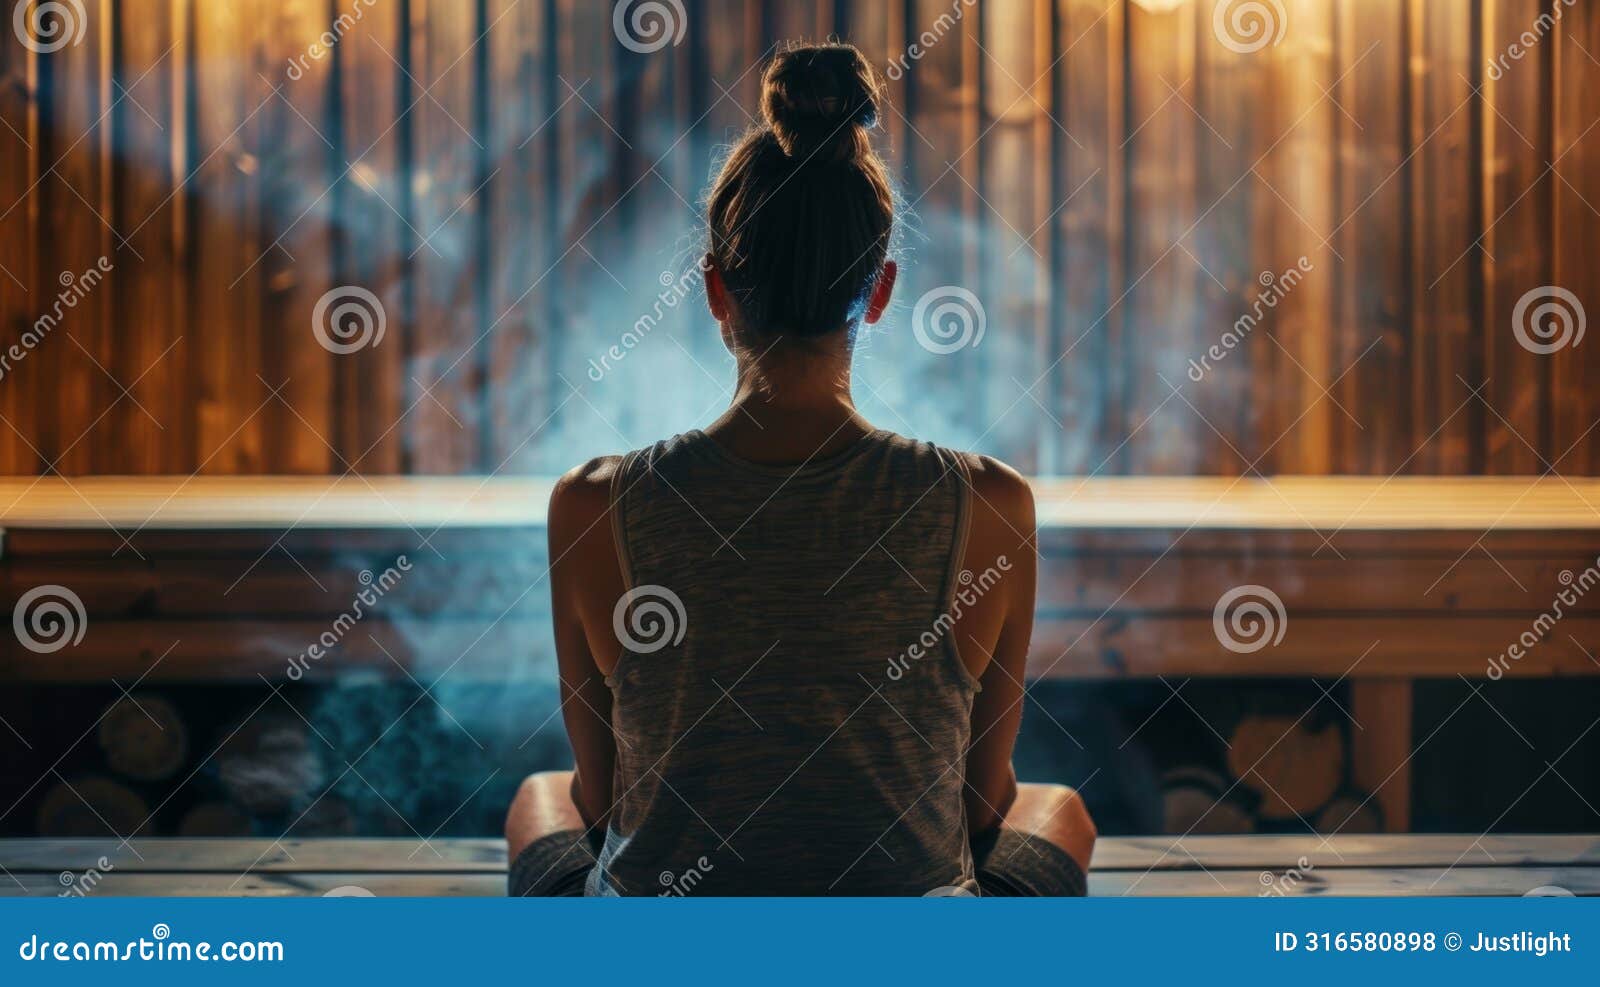 a woman meditating in the sauna her mind filled with positive affirmations and visualizations of her desired future.